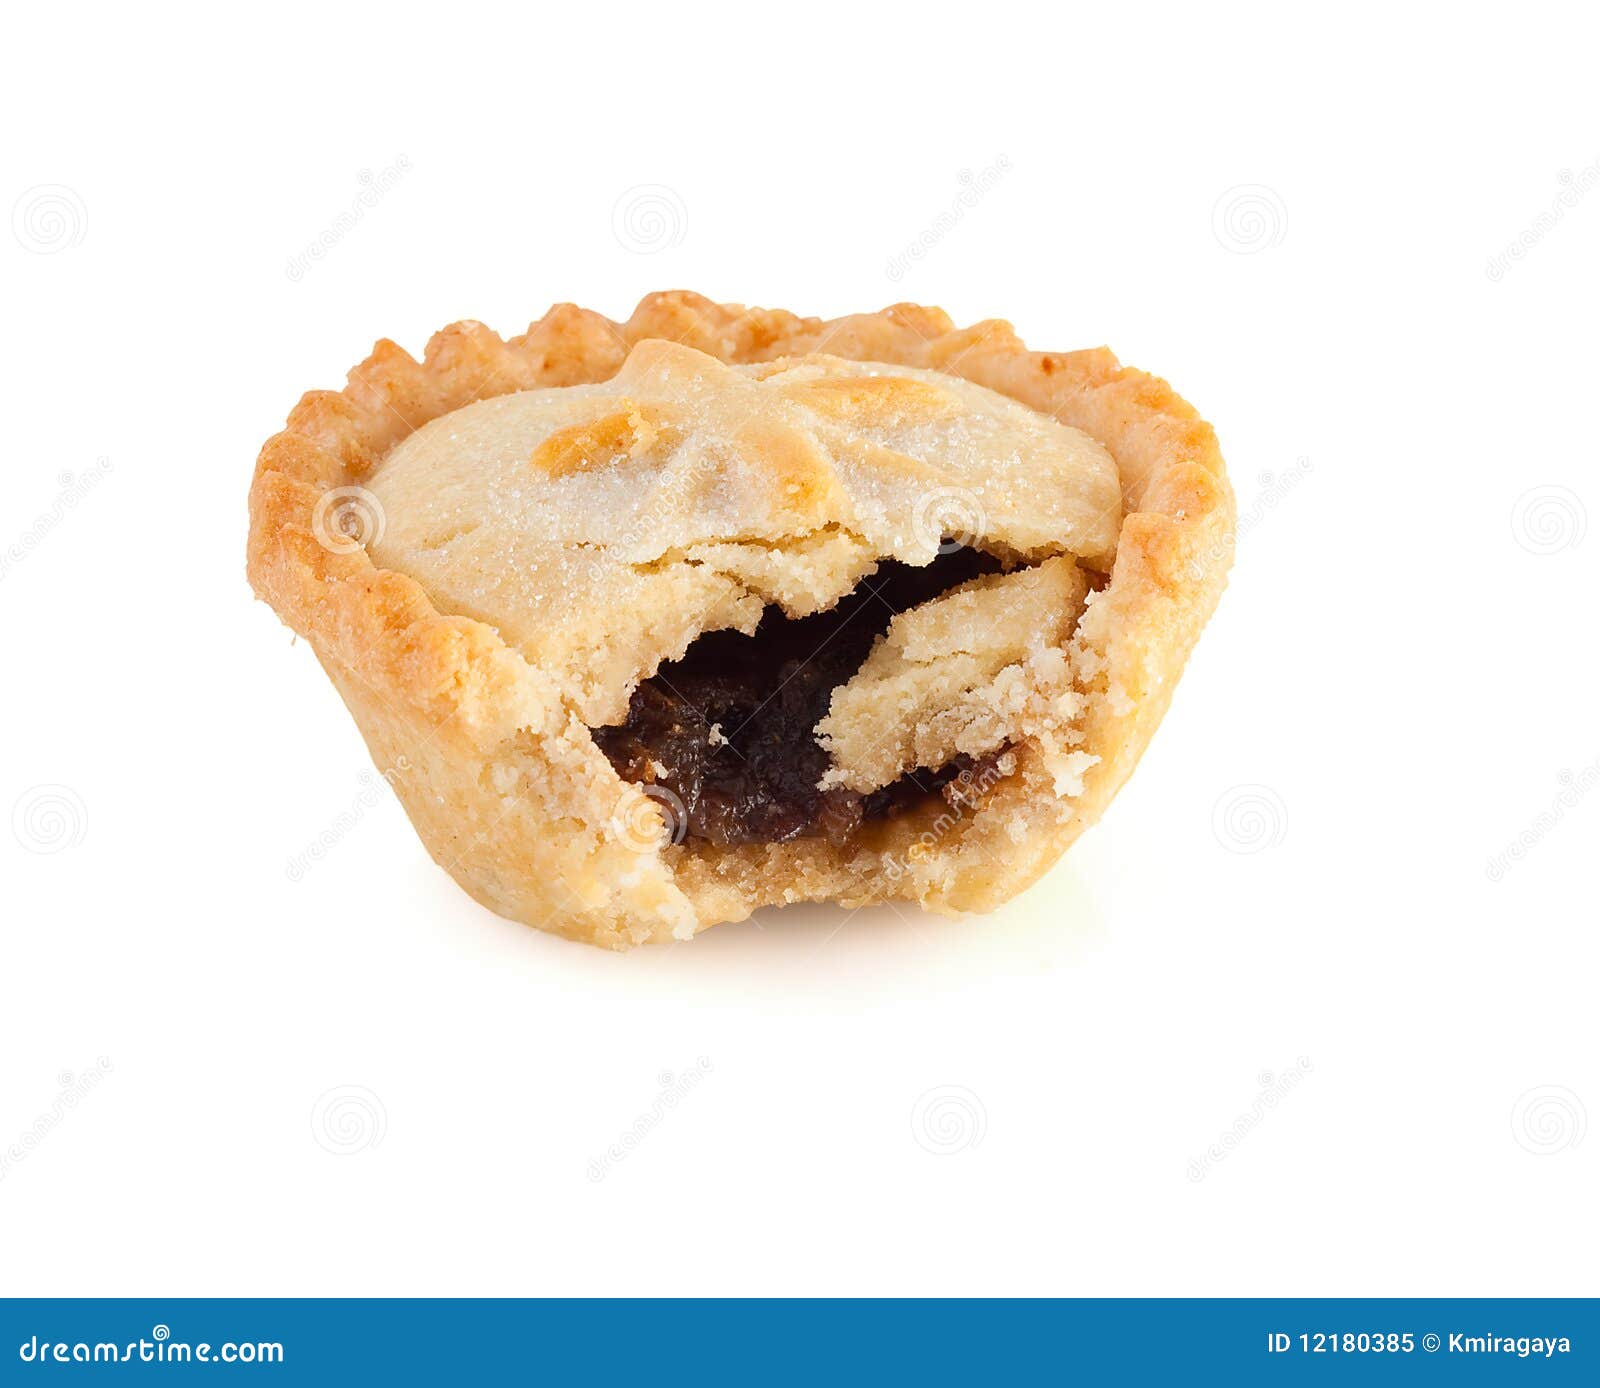 clipart christmas mince pies - photo #26